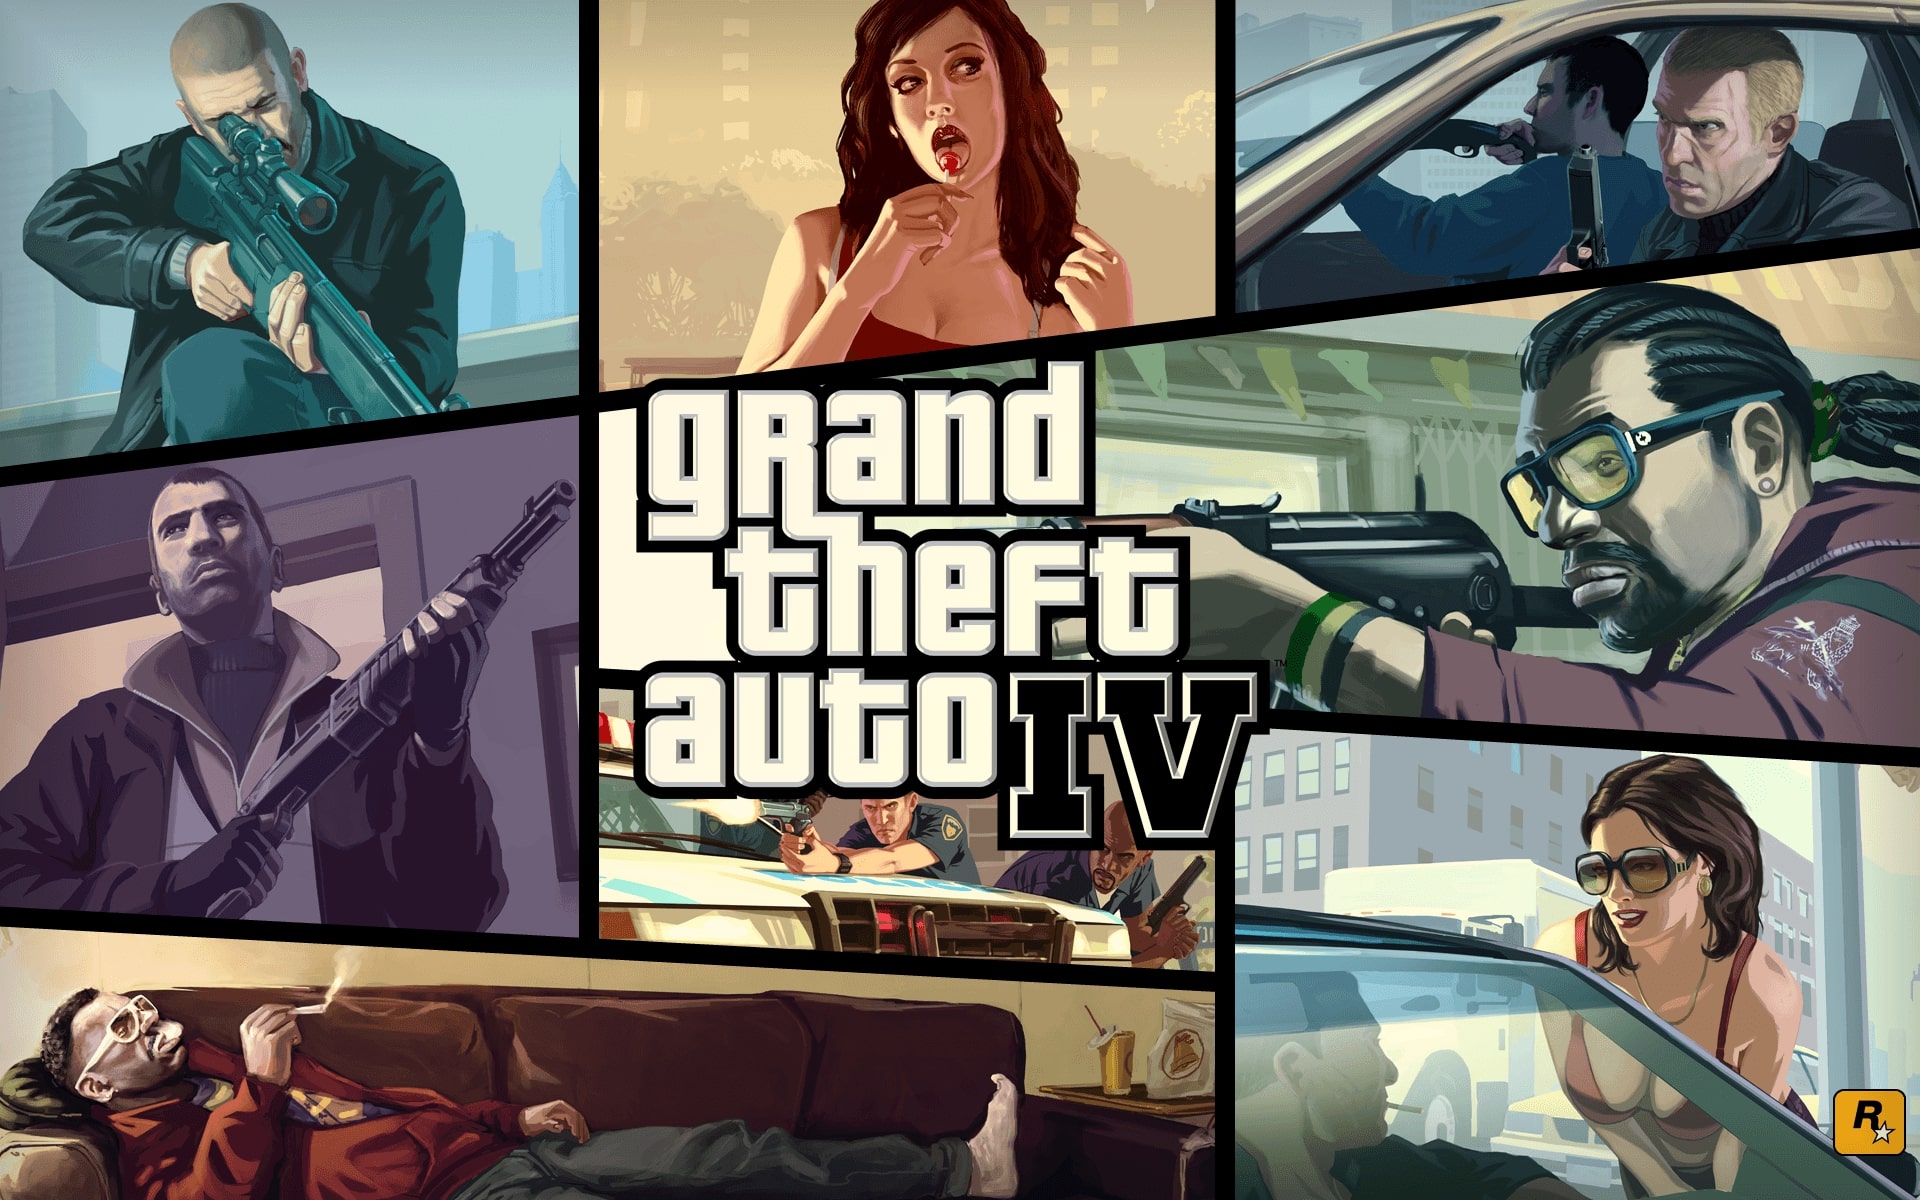 Wallpaper Of Video Game, Grand Theft Auto Iv, Gta Iv, - Gta Iv Wallpaper Hd - HD Wallpaper 